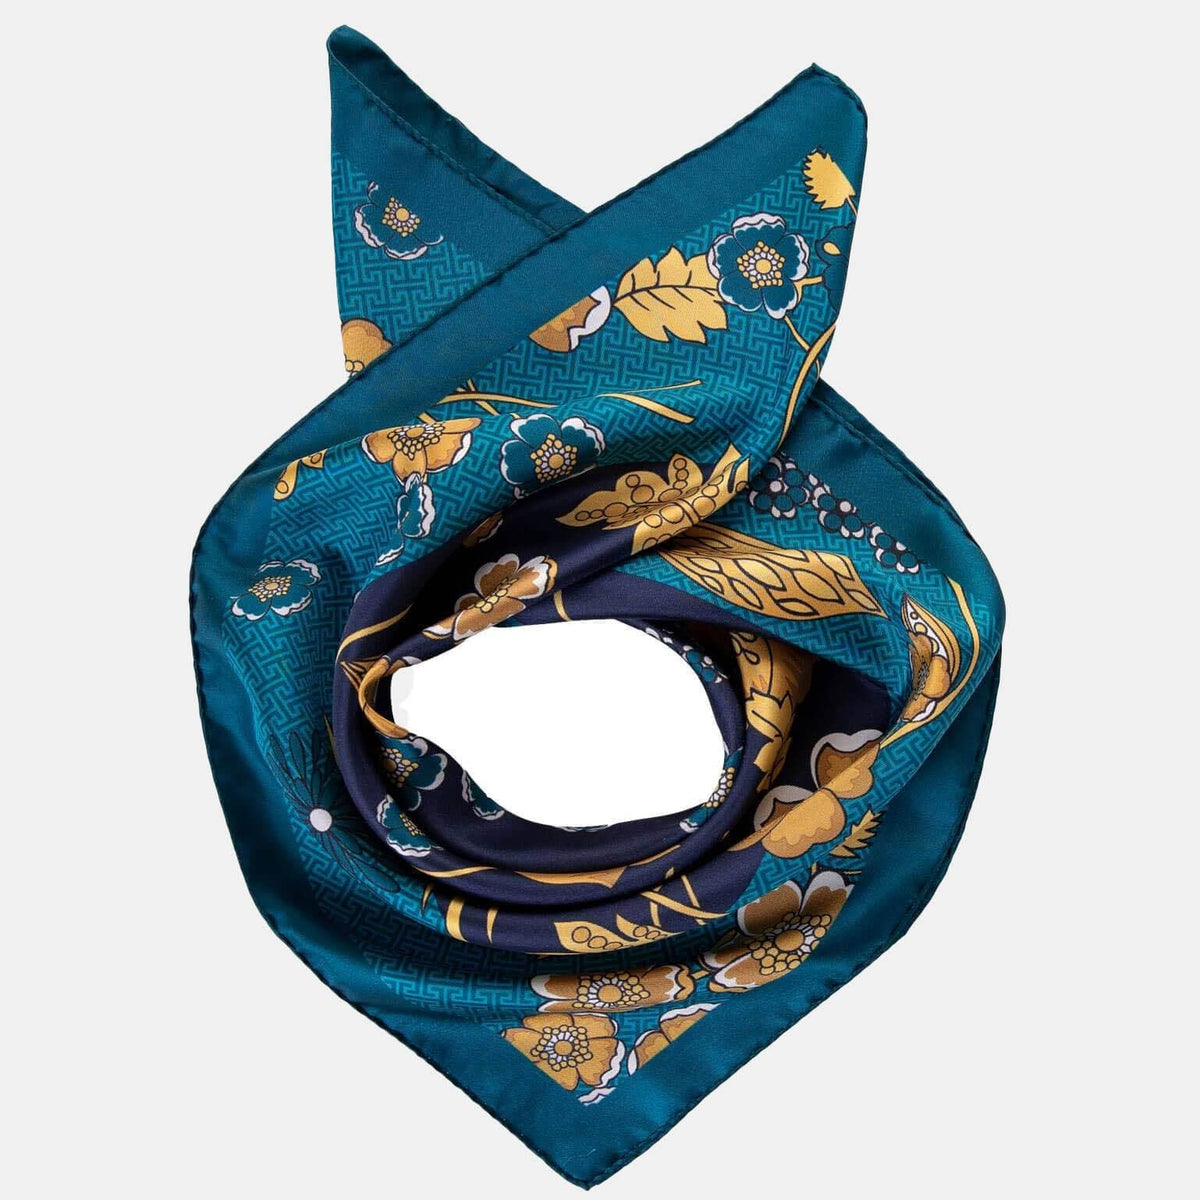 Teal Silk Scarf - Floral Print Made in Italy